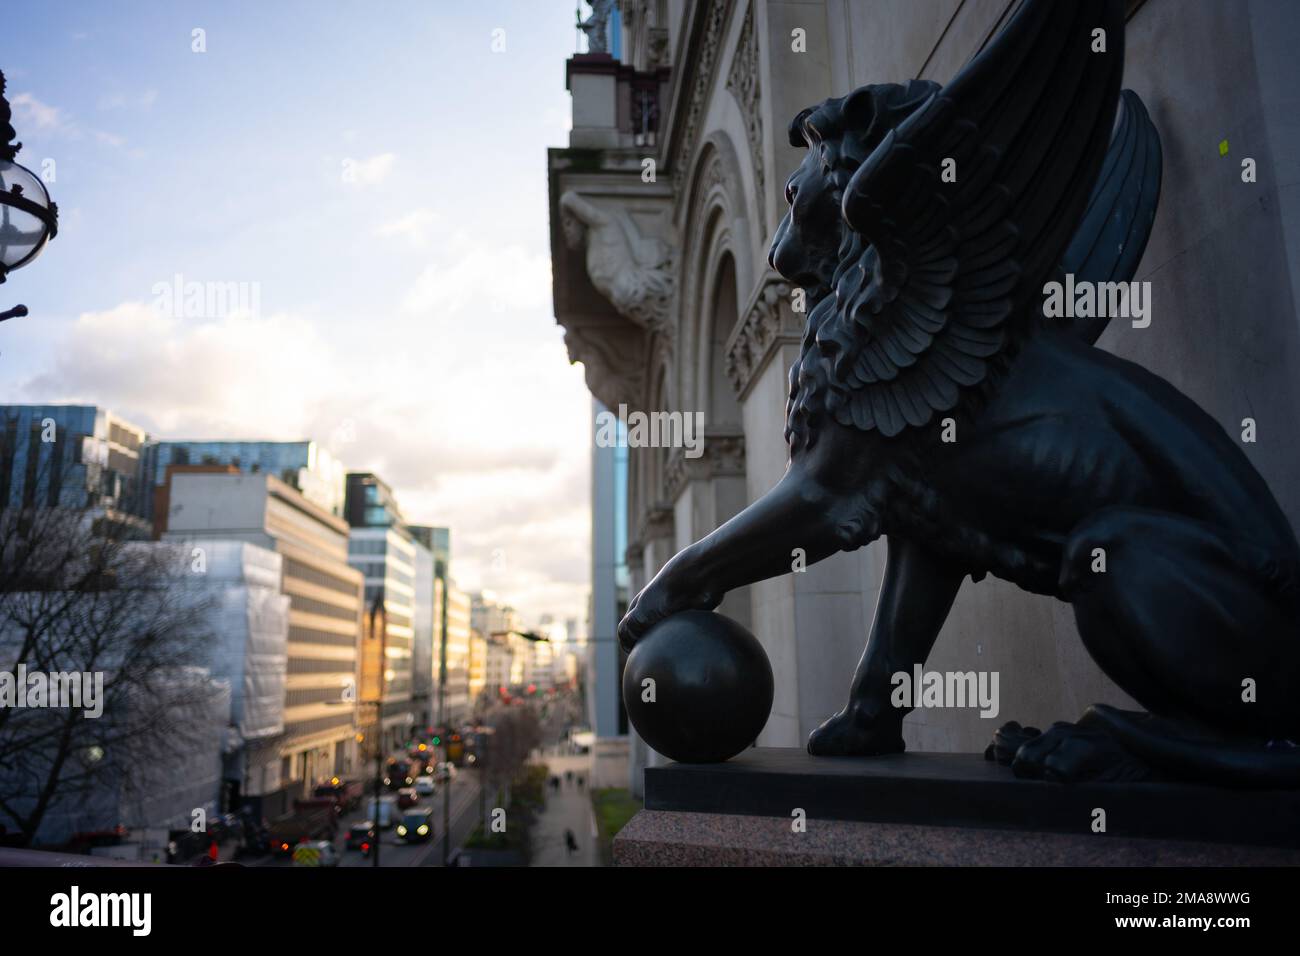 Winged Lion statue on Holborn Viaduct, the first flyover, was opened by Queen Victoria in 1869. Stock Photo